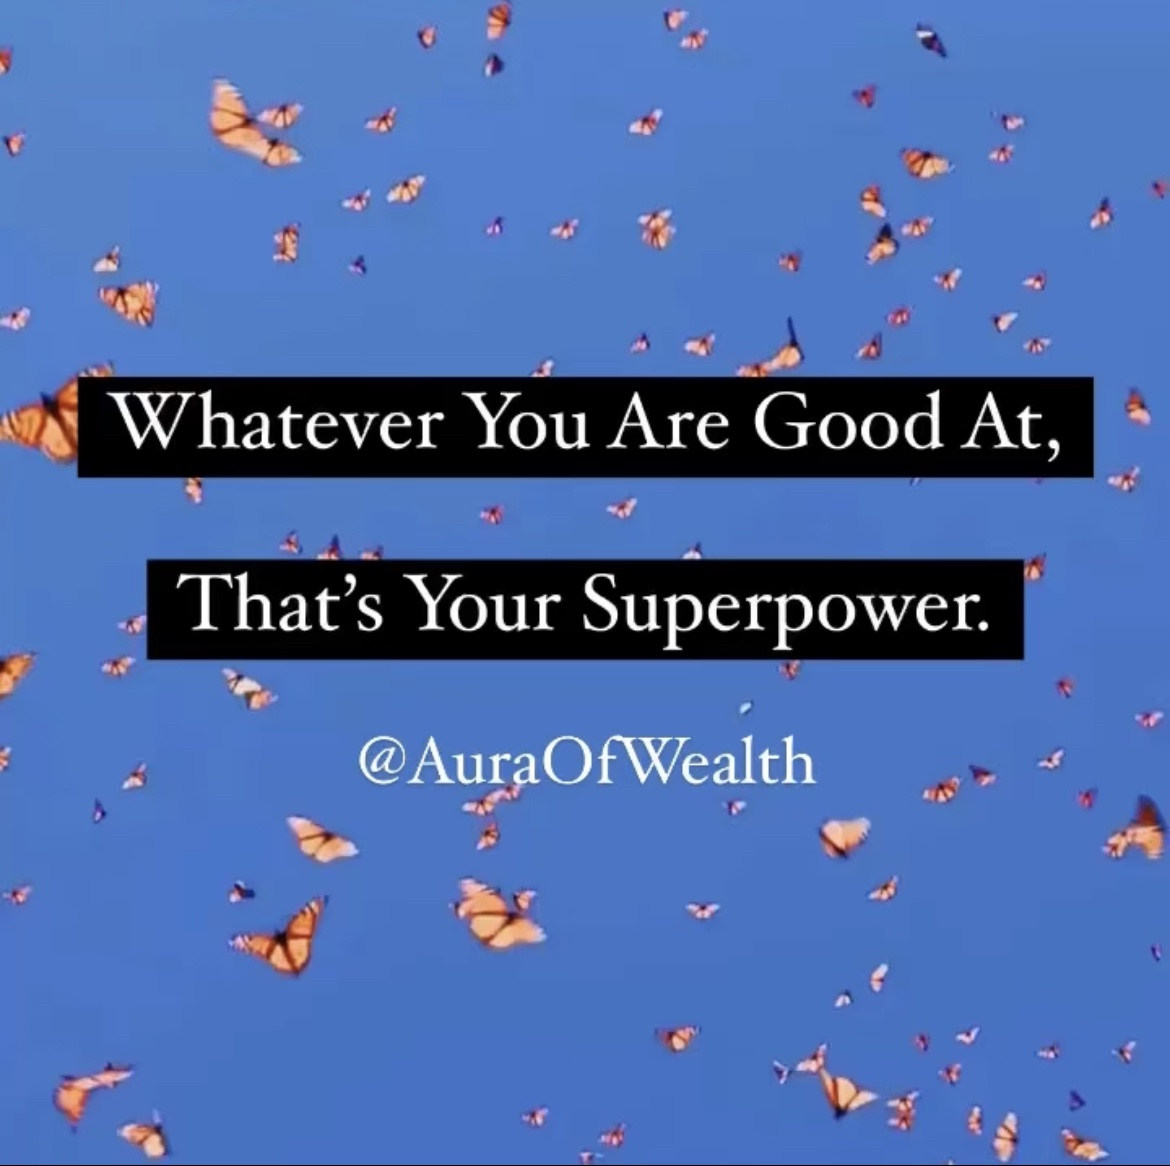 How To Own Your Superpower